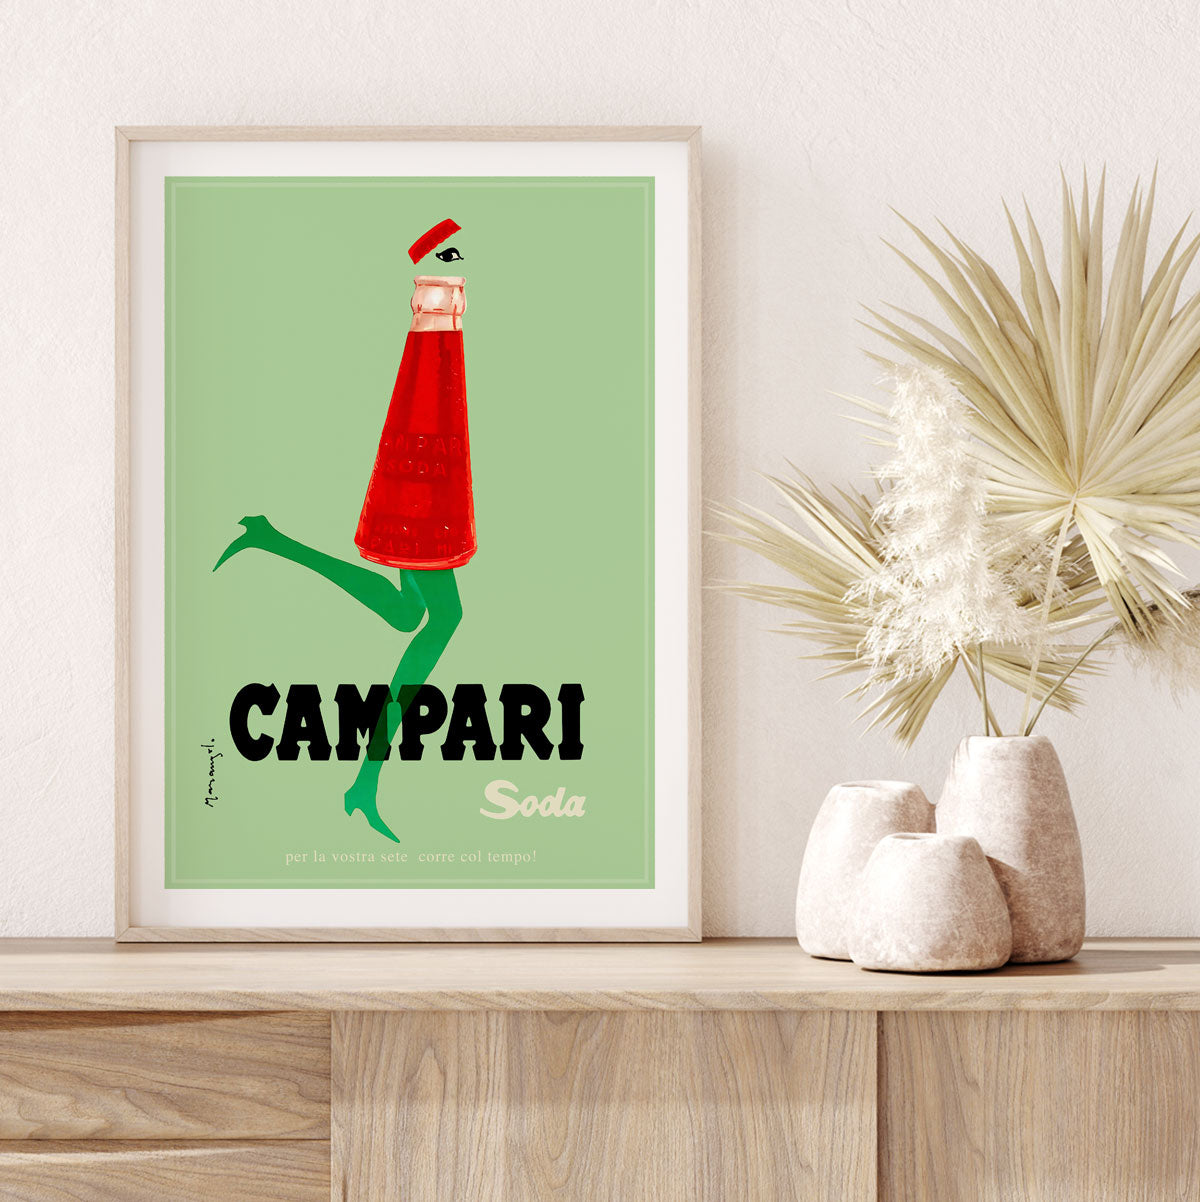 Campari Soda skipping retro vintage poster from Places We Luv